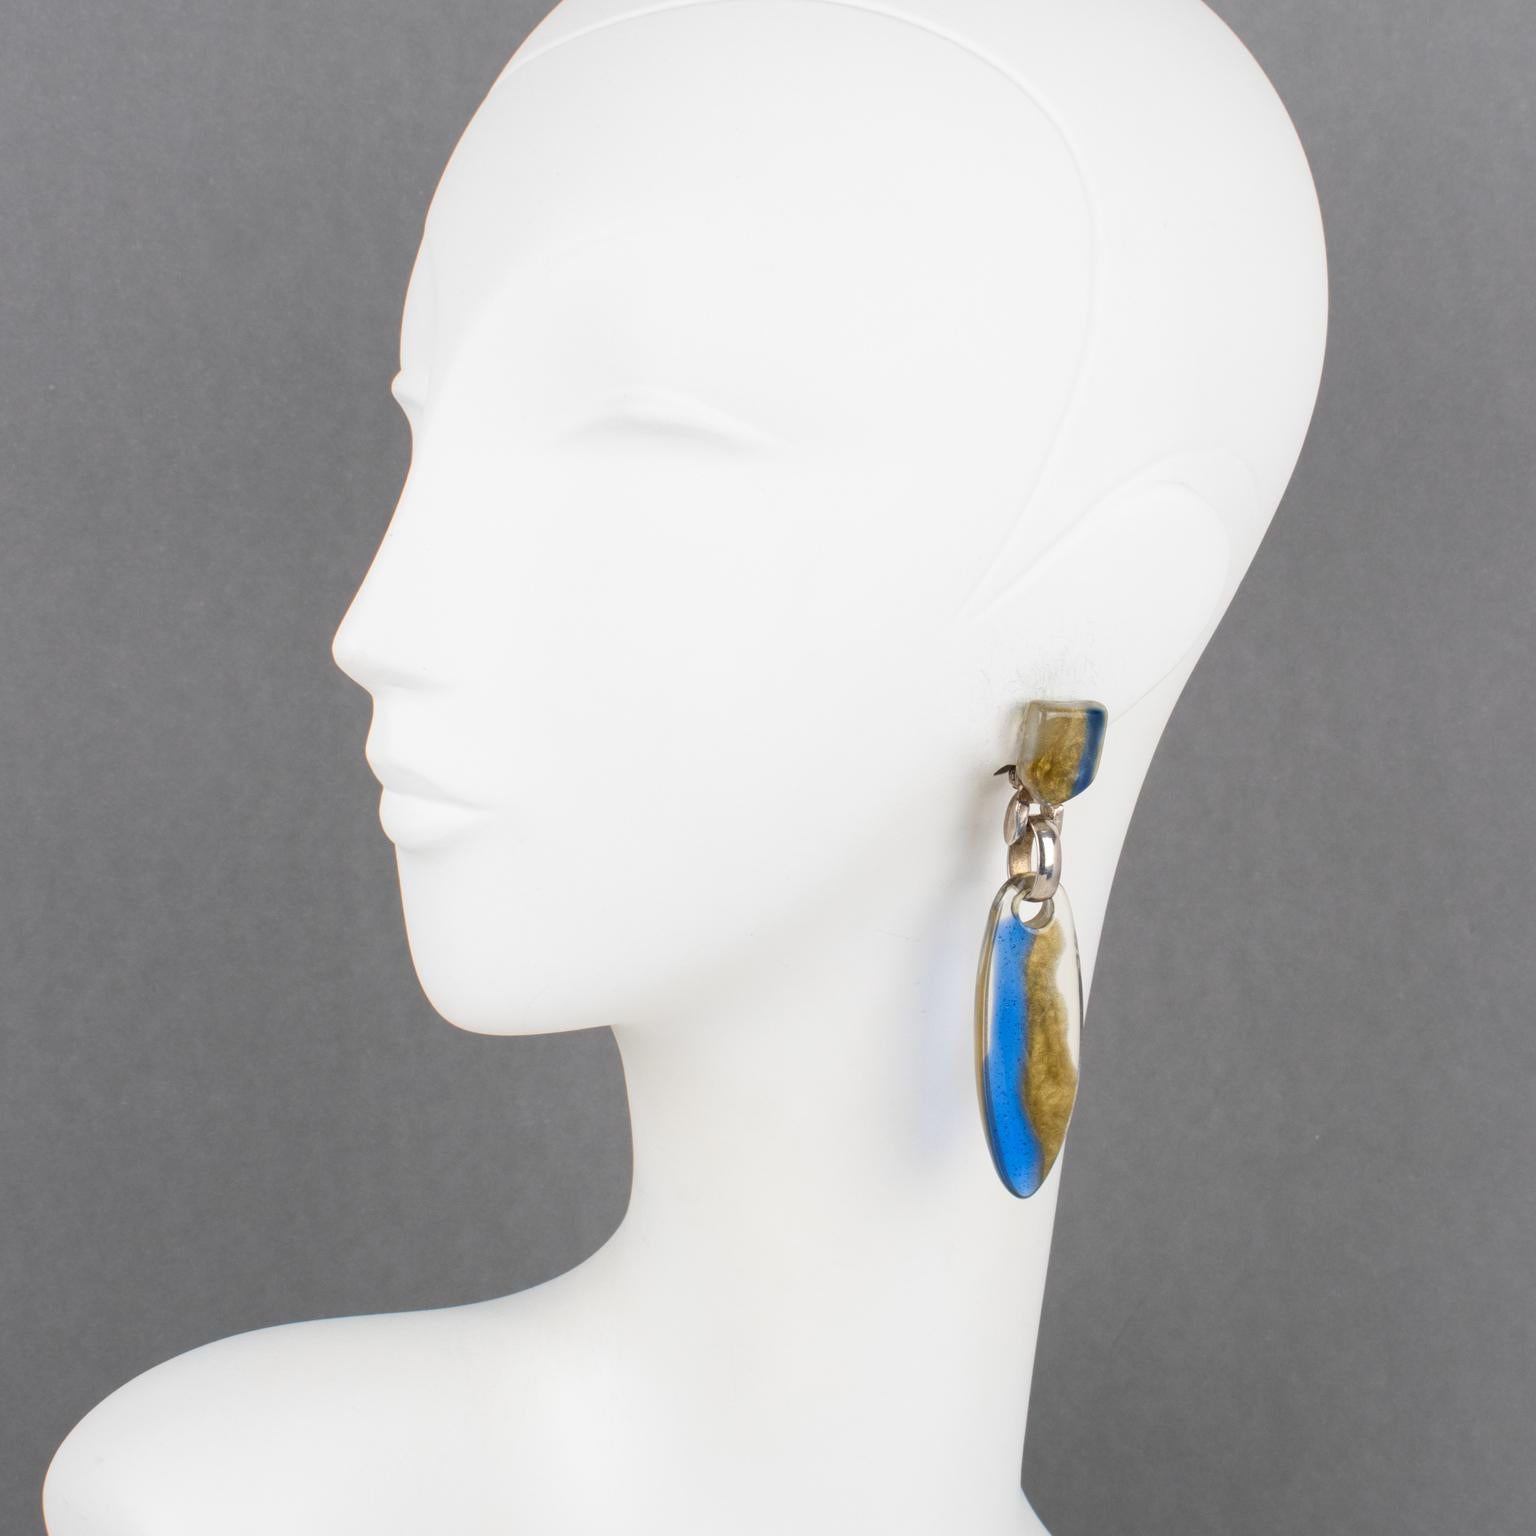 Dominique Denaive Paris designed these elegant resin clip-on earrings. The dangling shape boasts an elongated drop in a lovely semi-transparent color with cobalt blue and pearlized gold inclusions. Silver plate metal hardware linked the fastenings